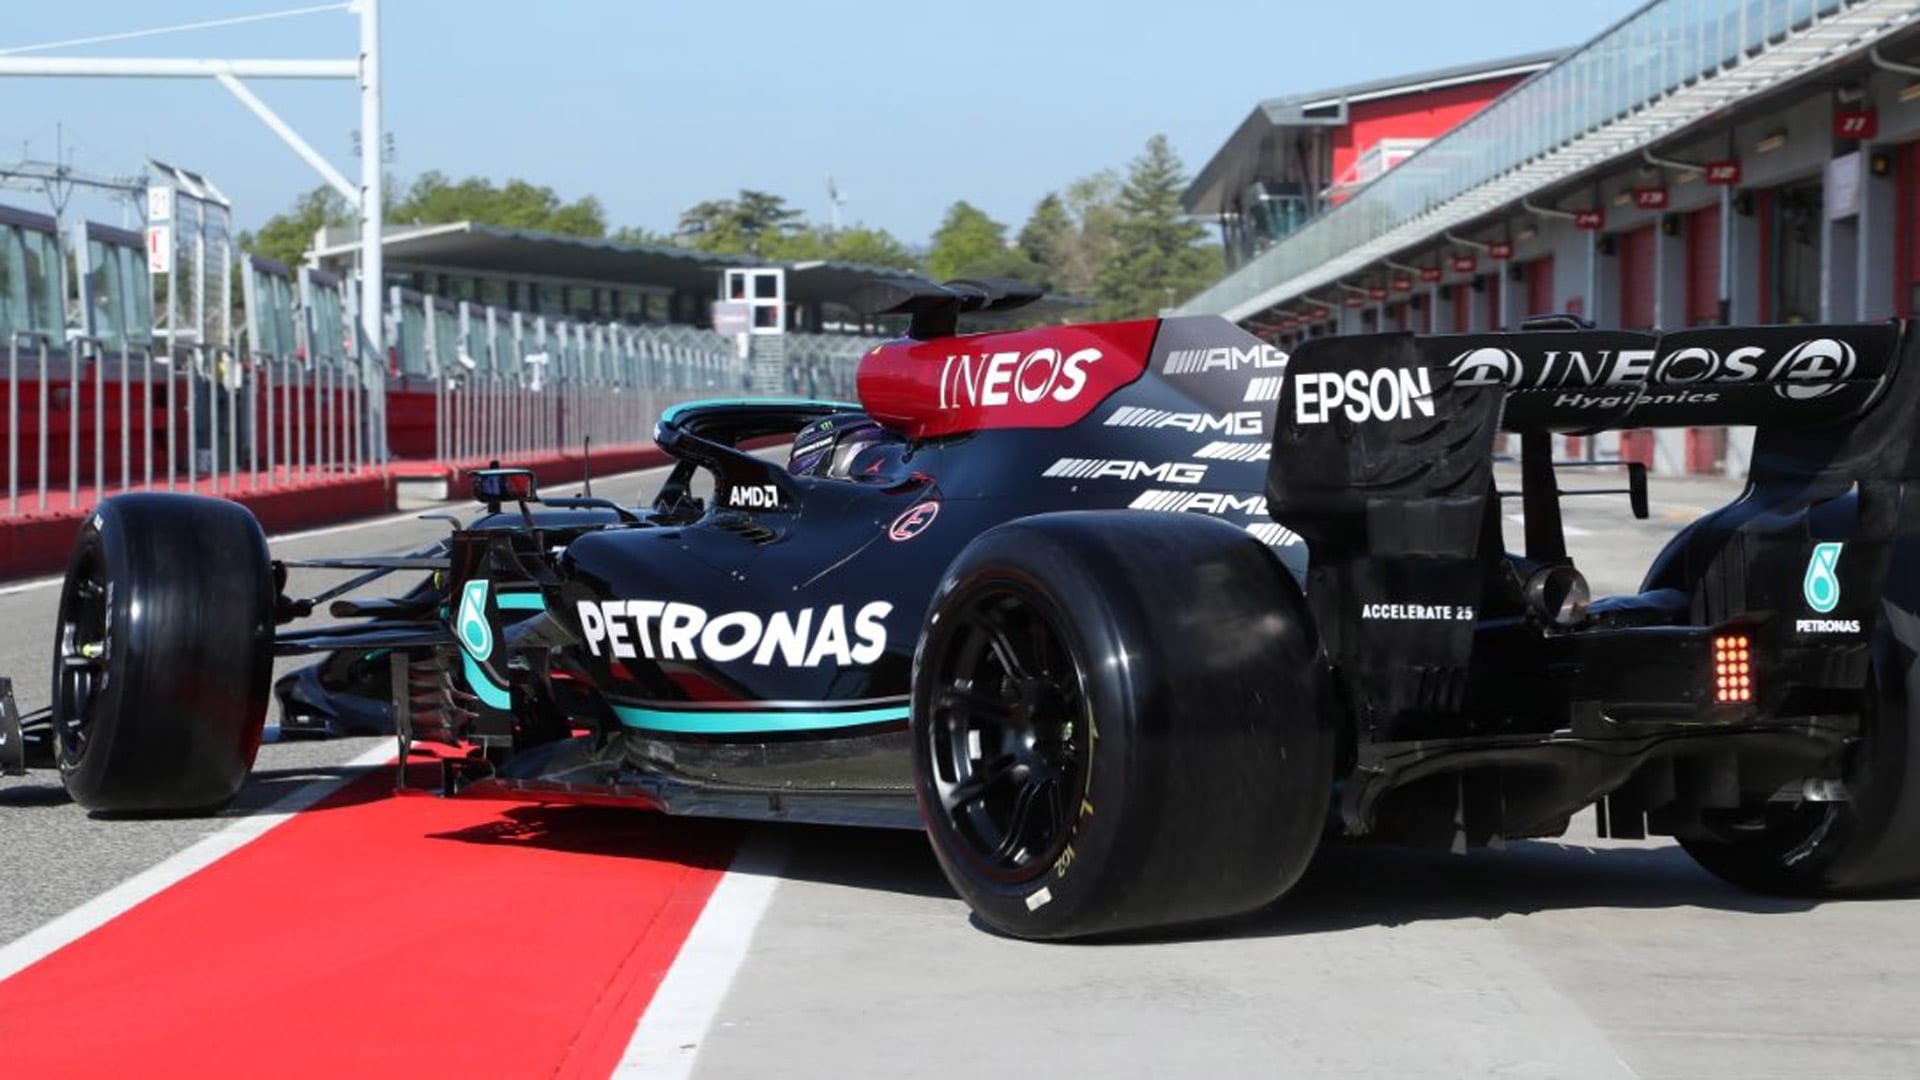 Hamilton Latest To Try 18 Inch Tyres As Mercedes Continue 2022 Pirelli Tests At Imola Formula 1